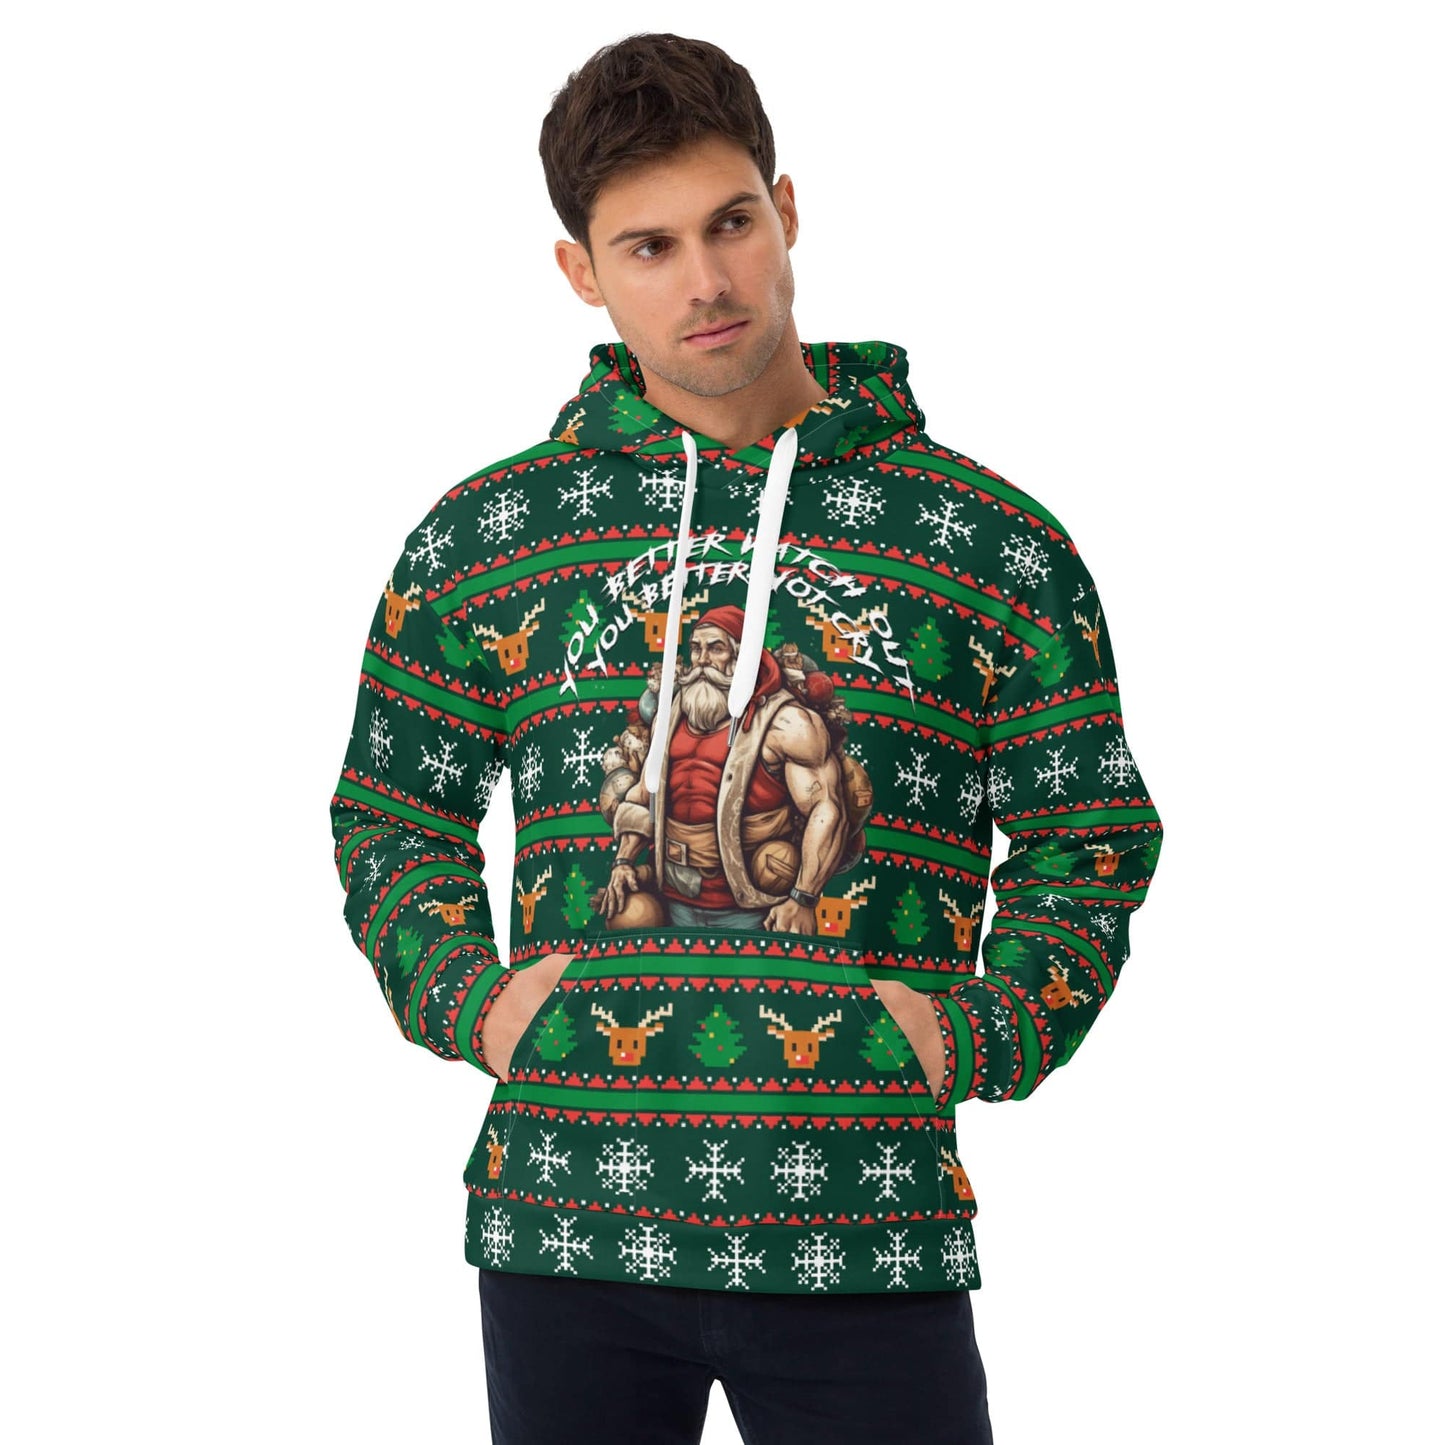 The Dirty Xmas Holiday Hoodie - green